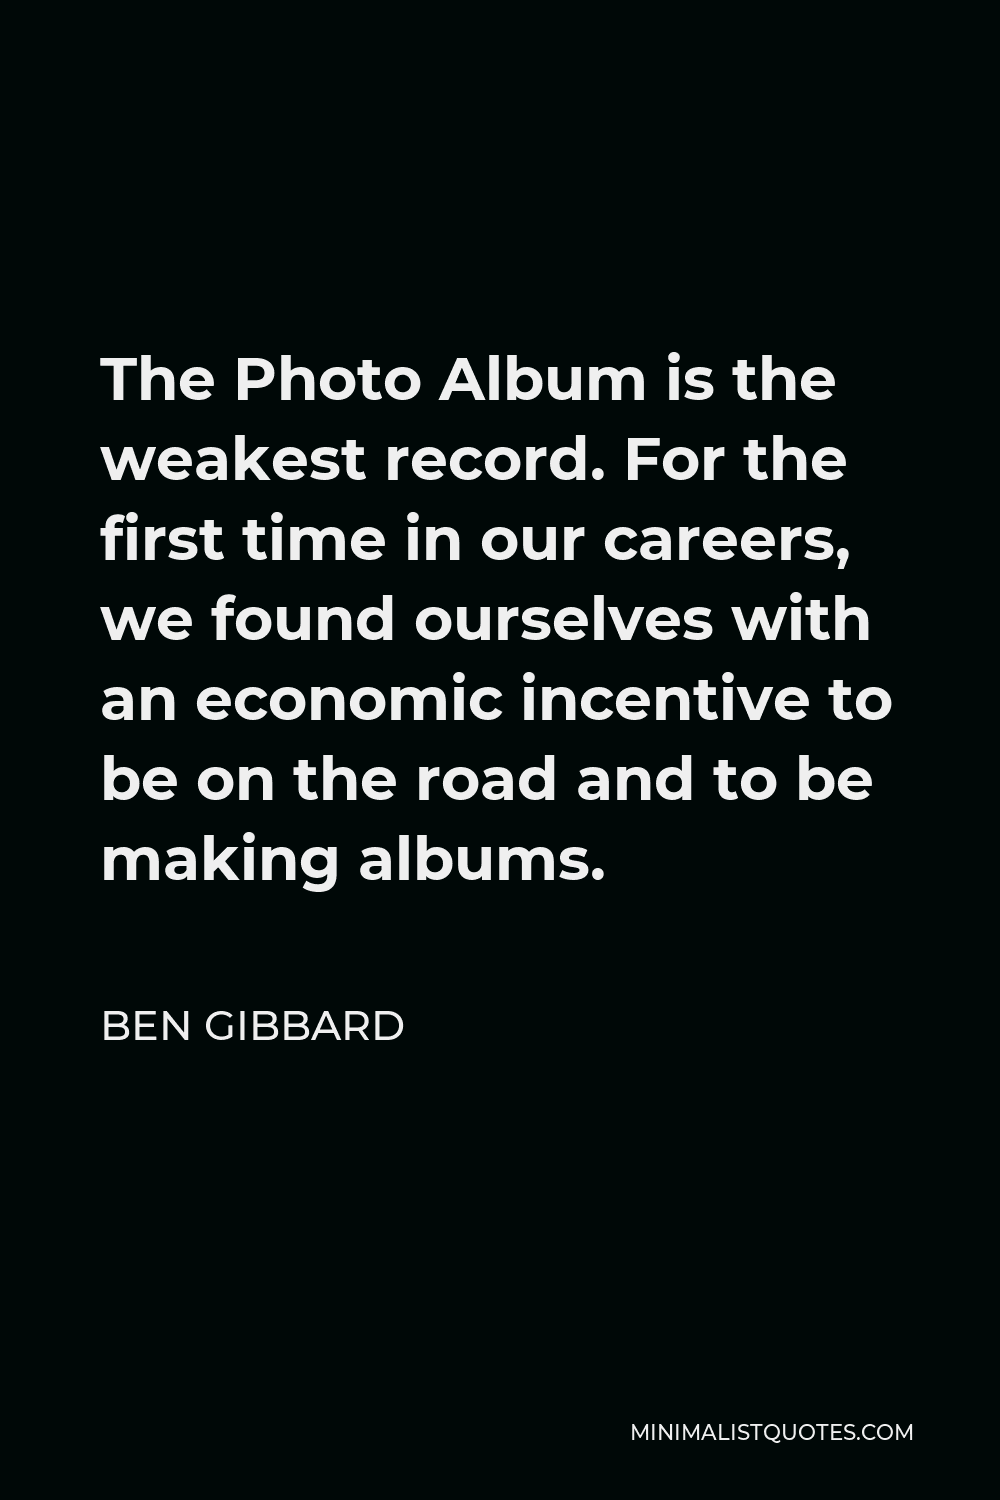 Ben Gibbard Quote - The Photo Album is the weakest record. For the first time in our careers, we found ourselves with an economic incentive to be on the road and to be making albums.